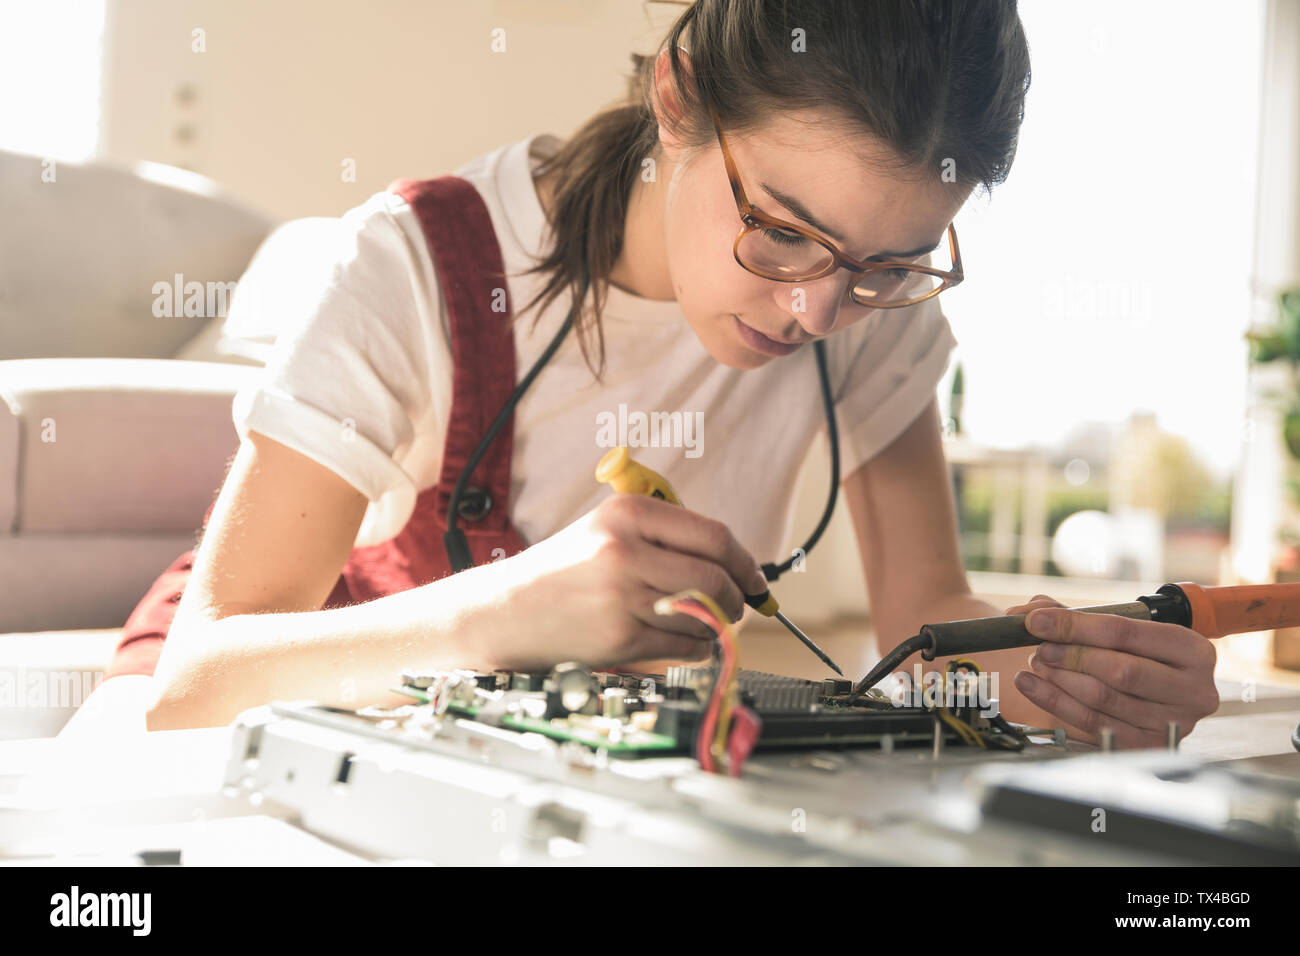 Young woman working on computer equipment at home Stock Photo